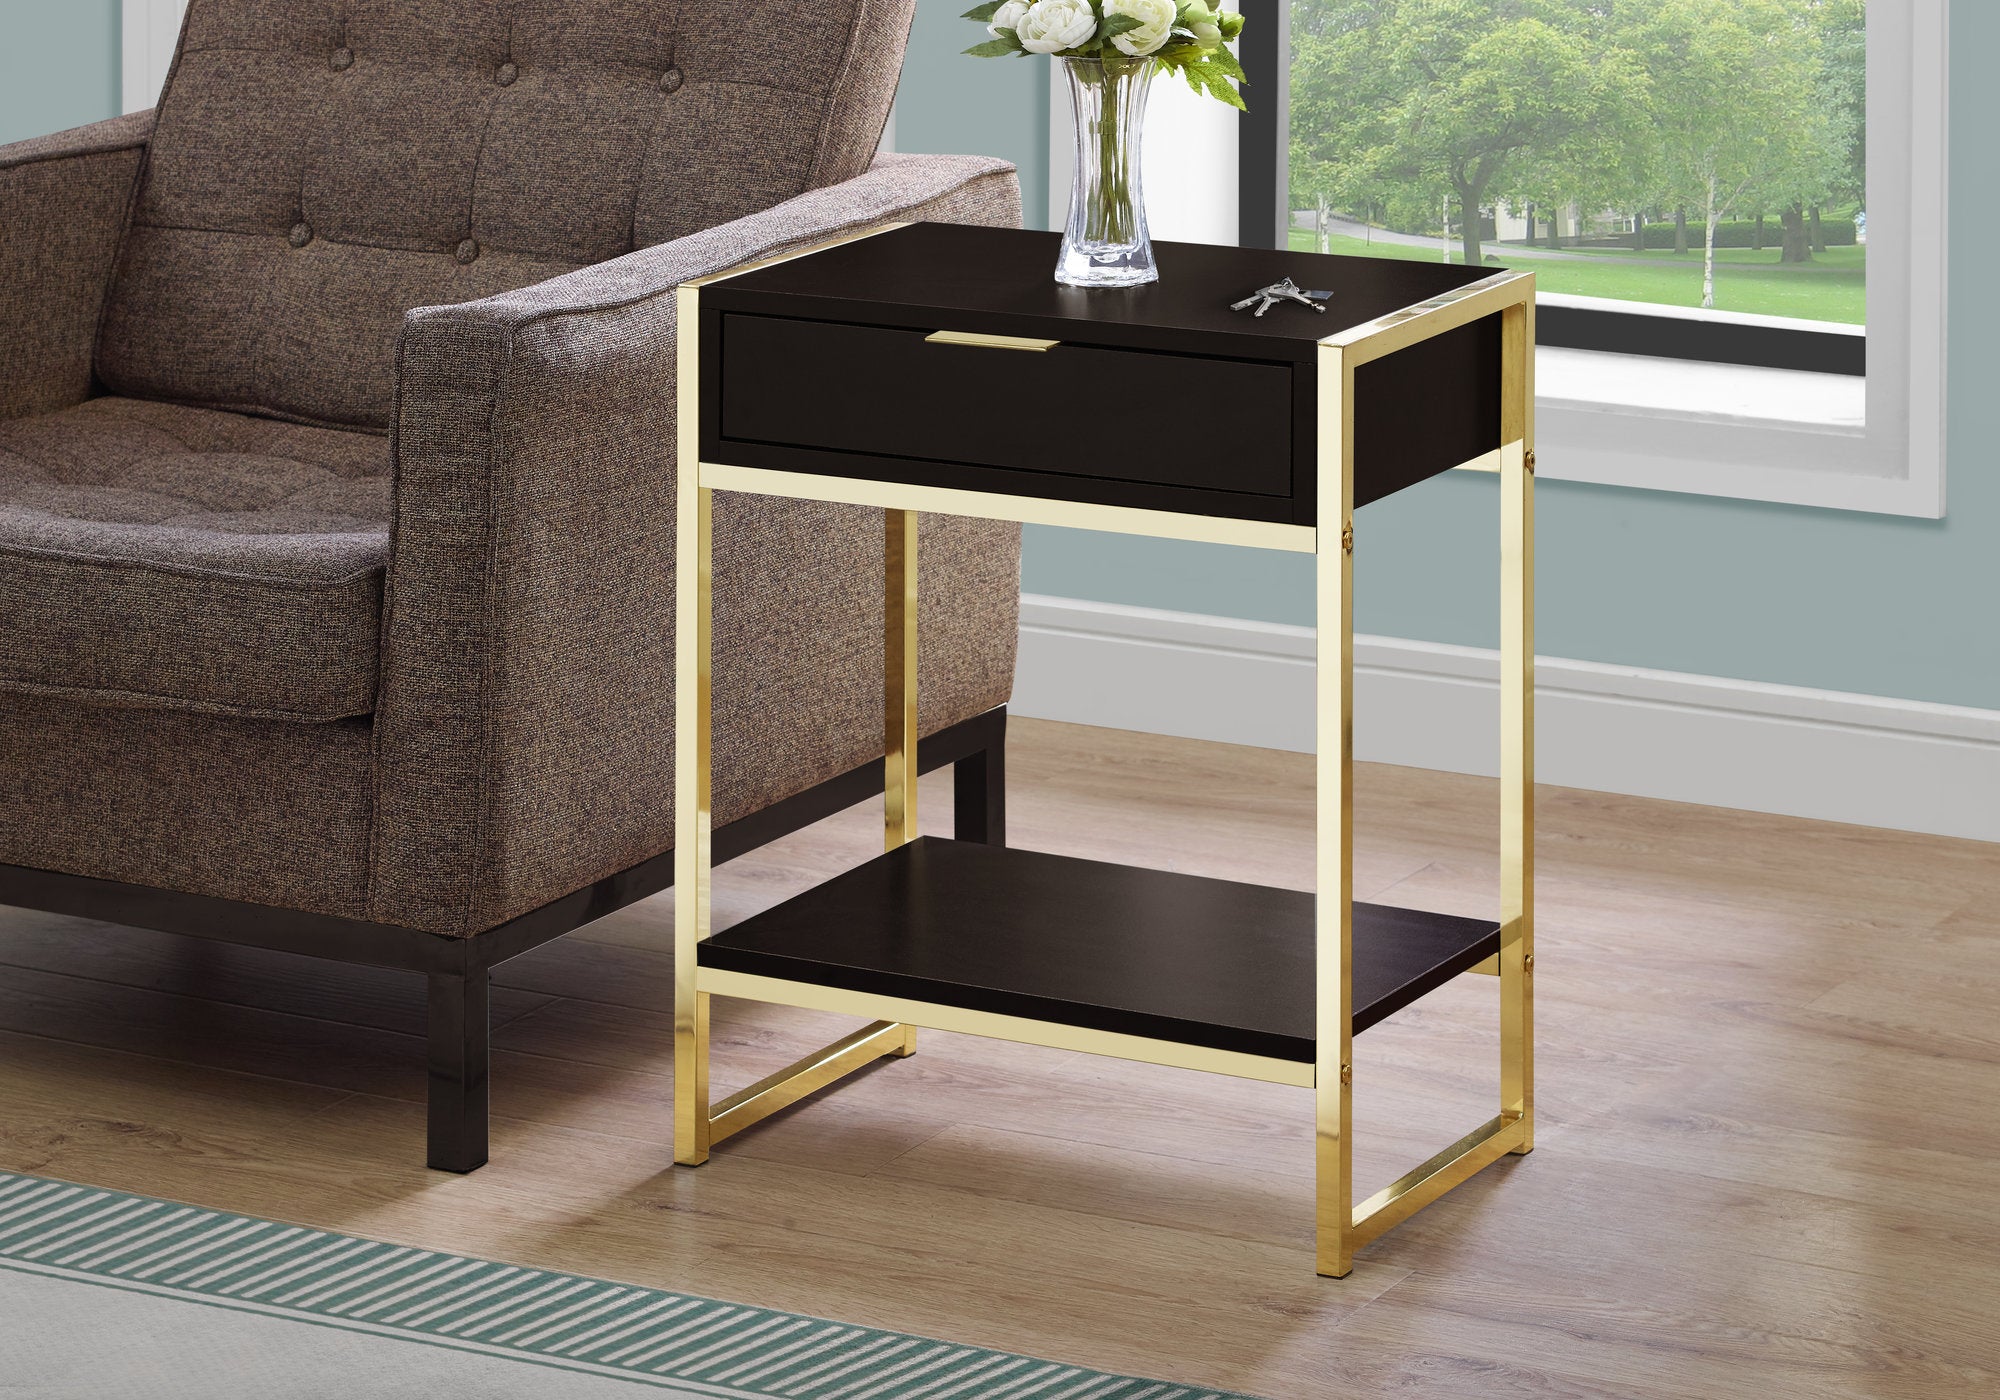 MN-923486    Accent Table, Side, End, Nightstand, Lamp, Living Room, Bedroom, Metal Legs, Laminate, Dark Brown, Gold, Contemporary, Modern